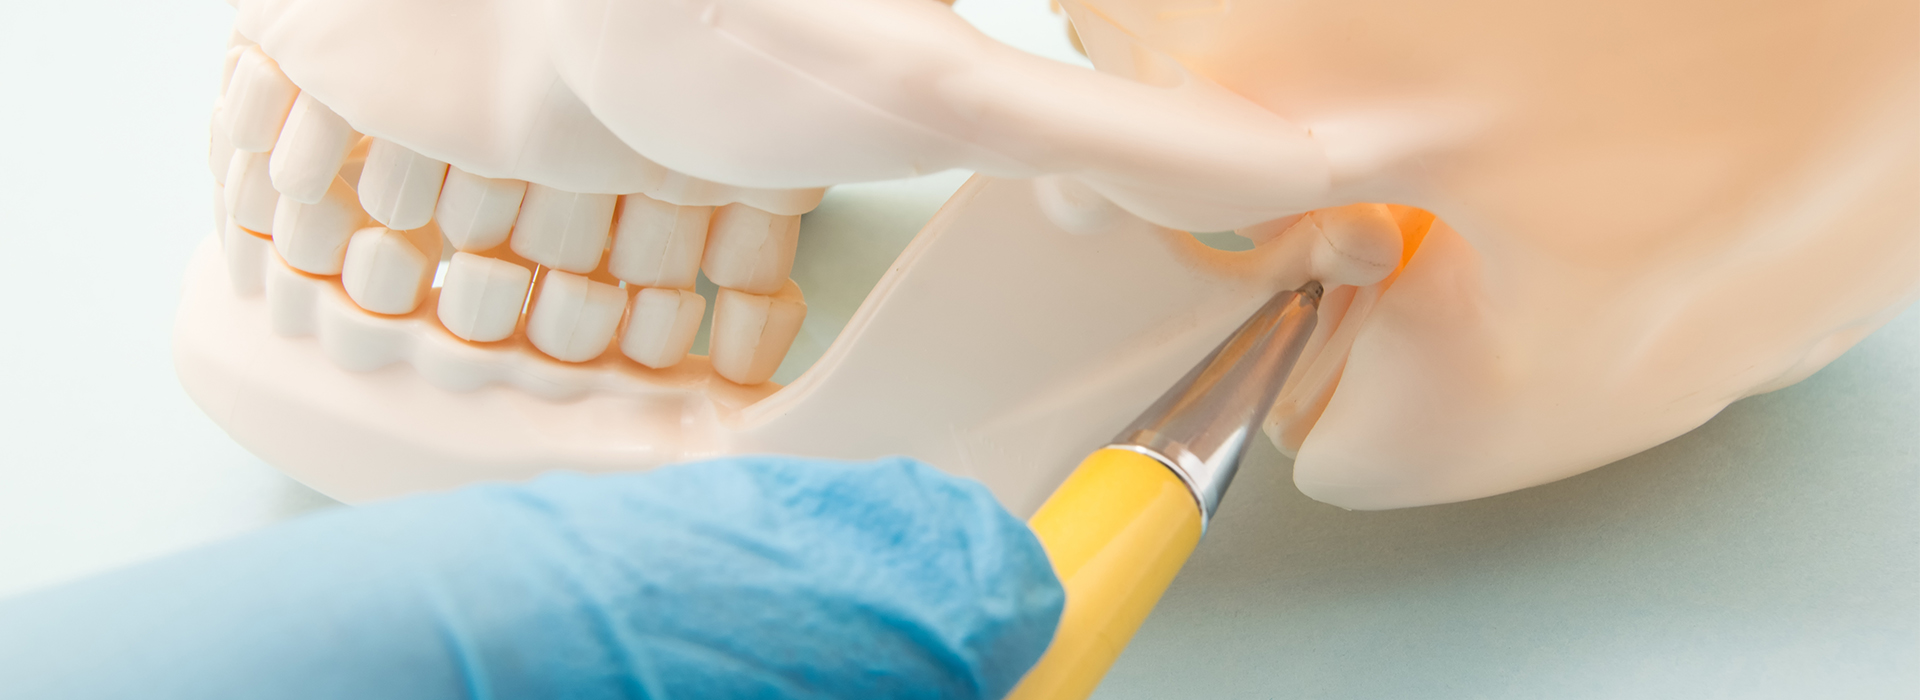 An image of a dental procedure being performed, featuring a model human head with teeth and a yellow instrument in the process of fixing a tooth.